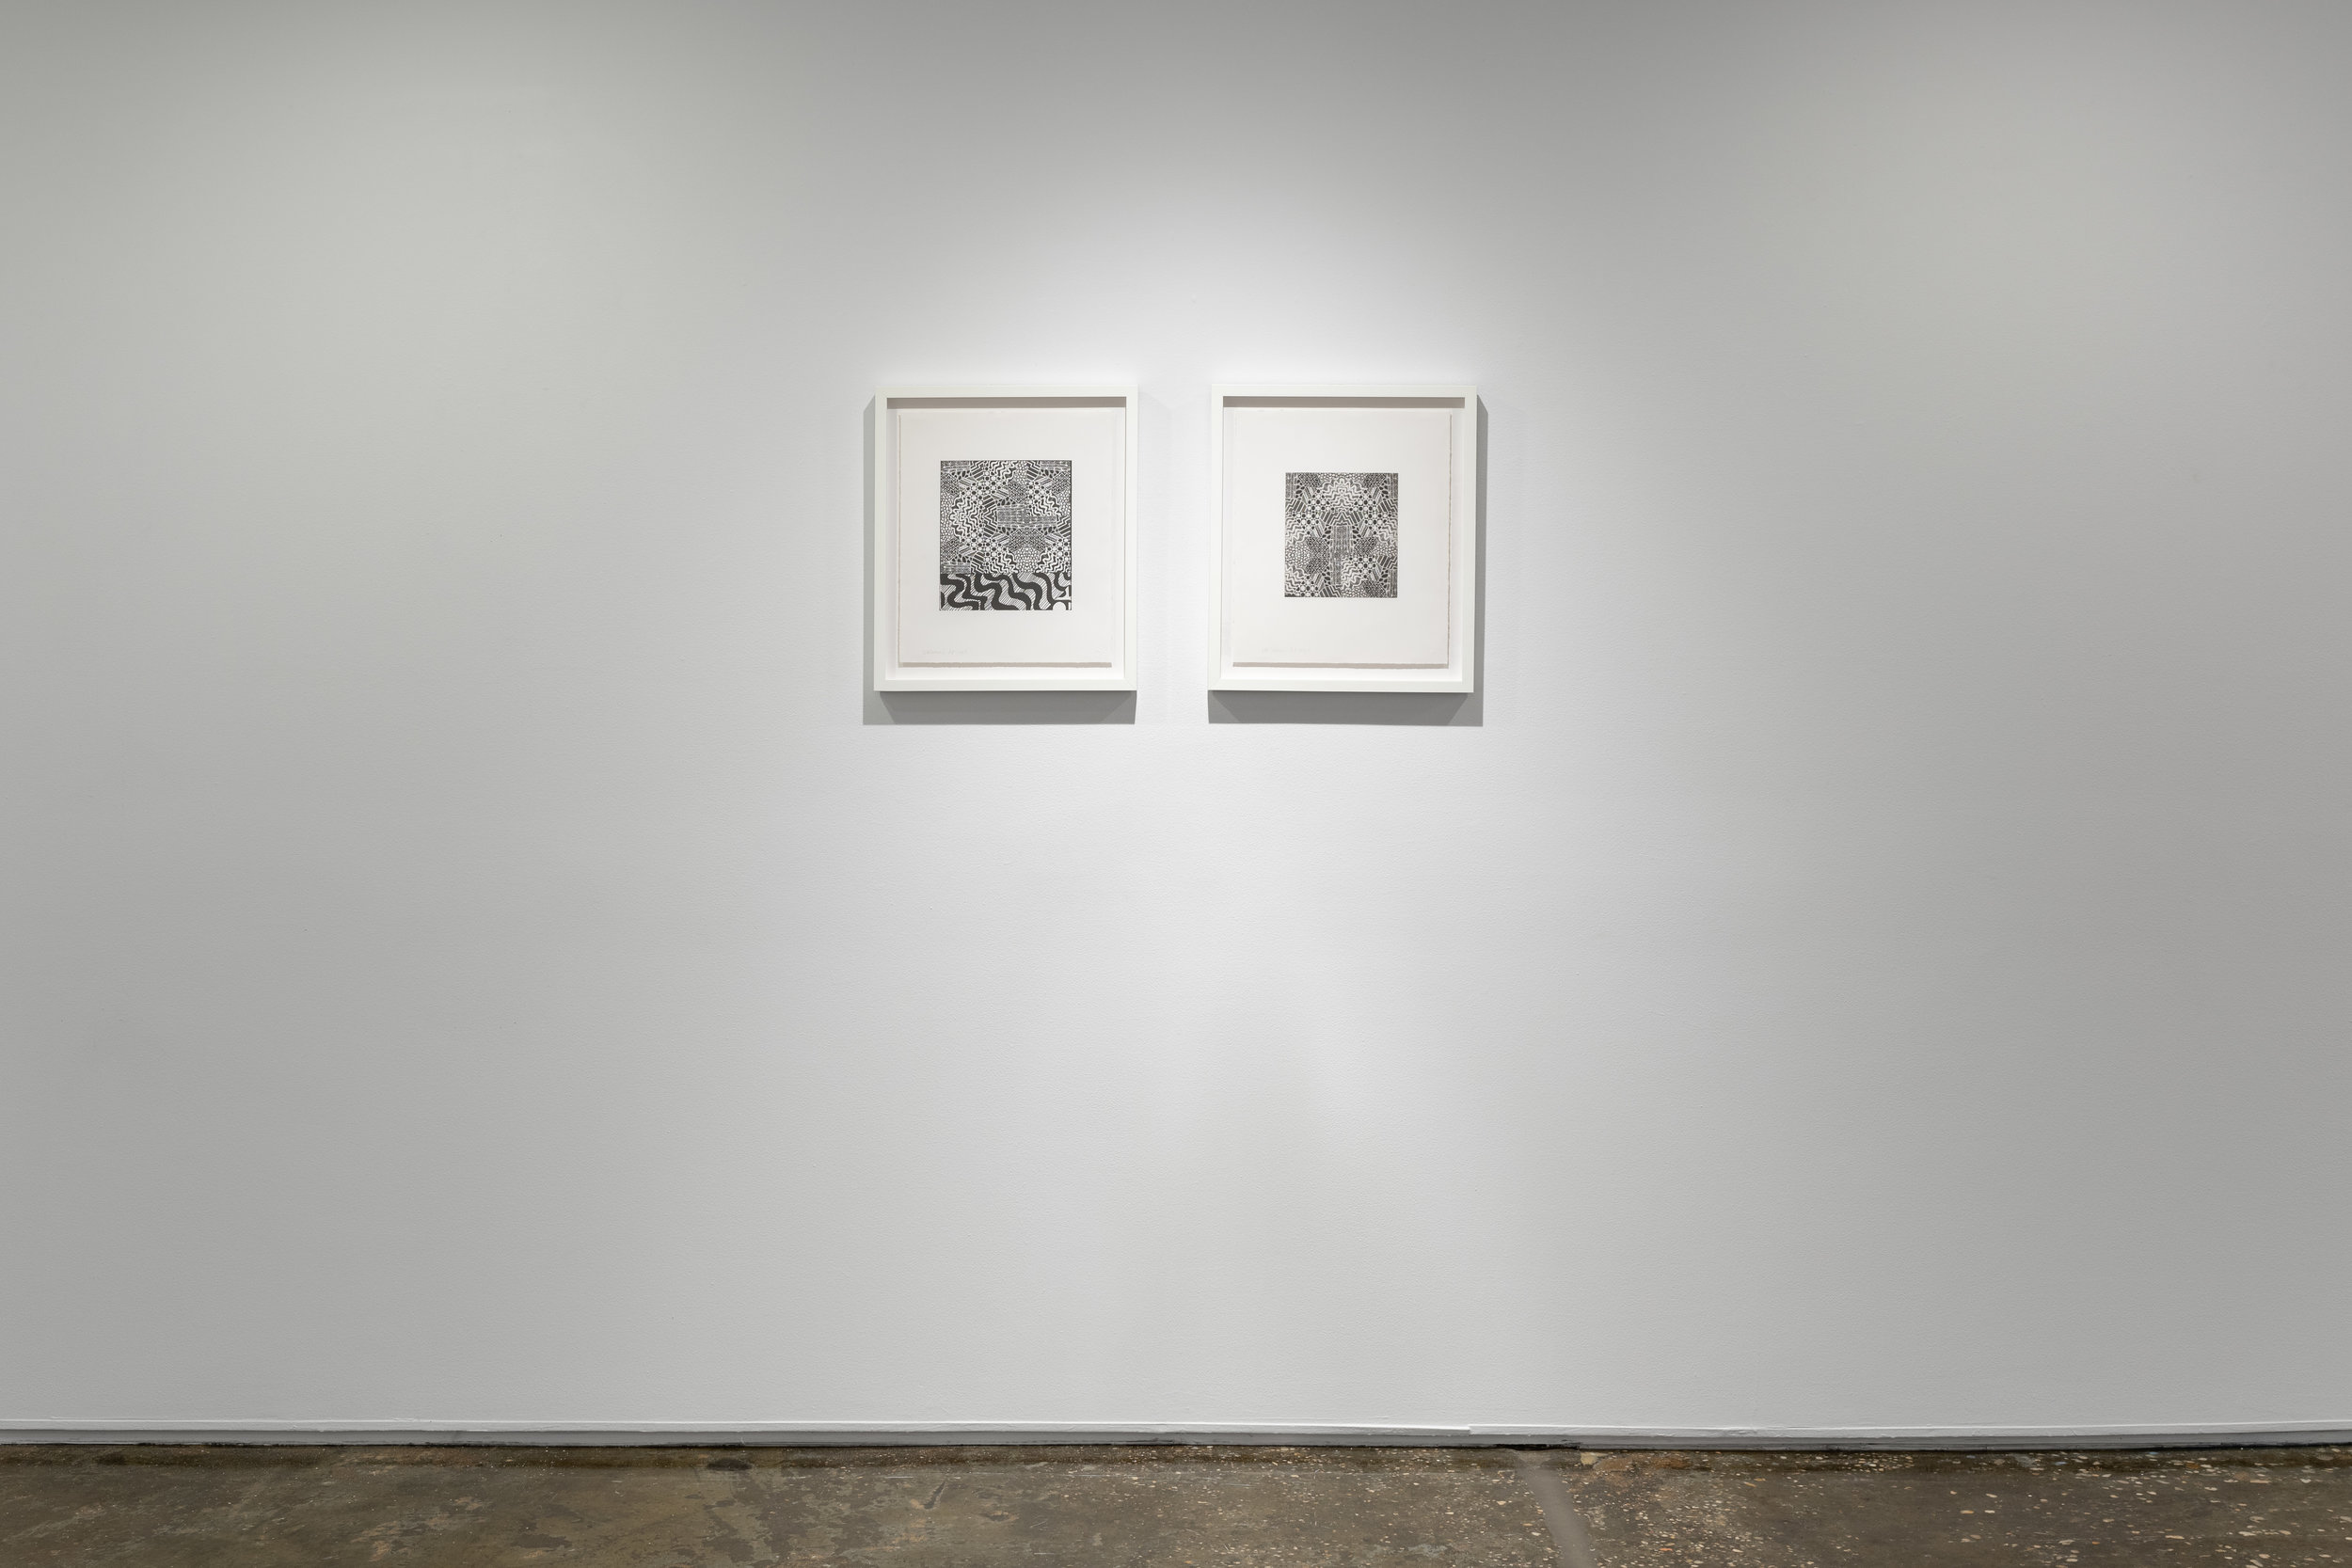  Installation view of  Active directions of the mind . Photo by Sebastian Bach. 